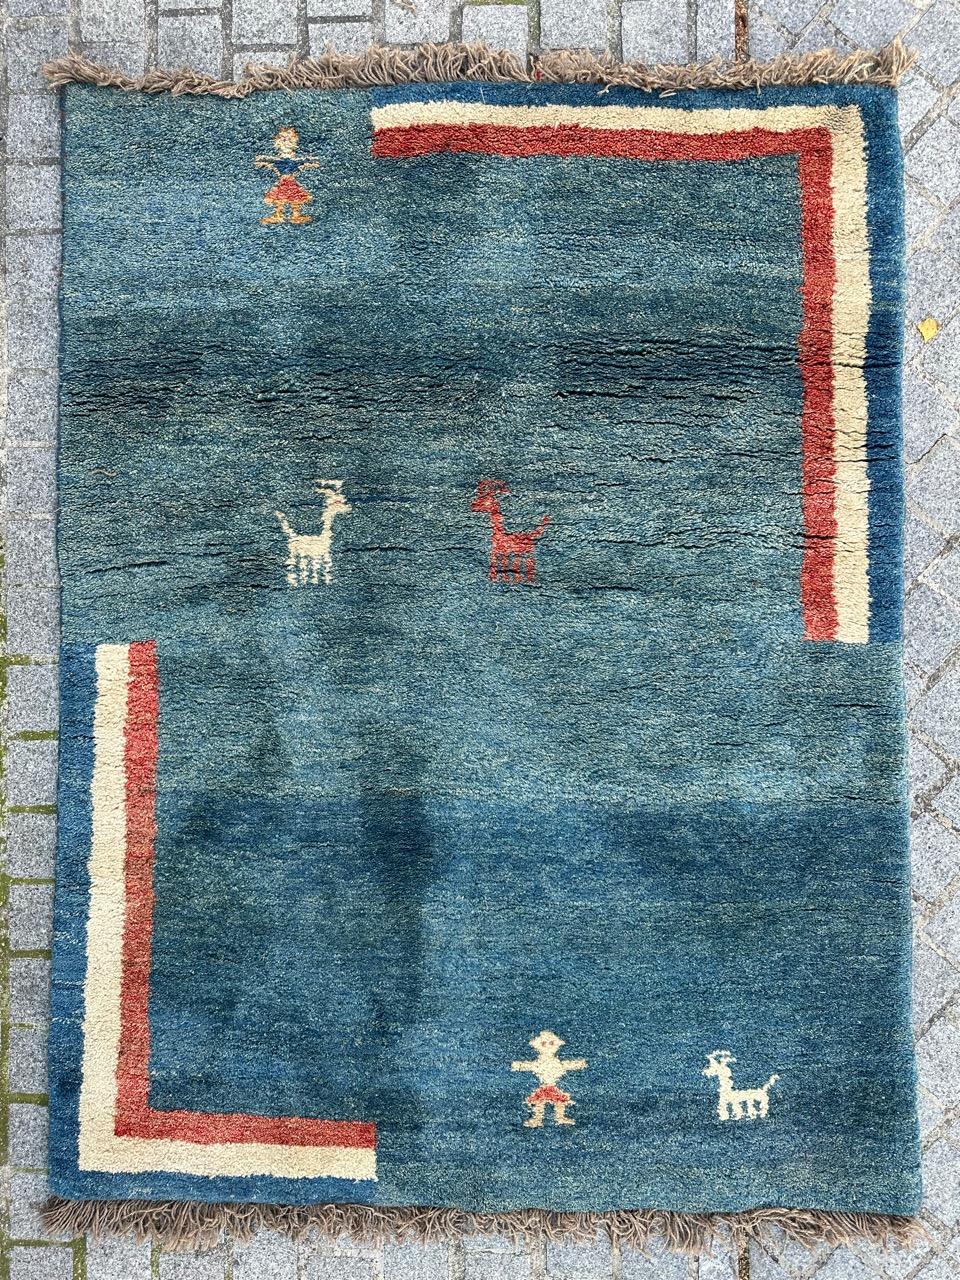 Introducing a stunning Gabbeh rug, meticulously hand-knotted in pure wool on a woolen foundation. This exquisite piece features a tribal-inspired geometric design reminiscent of Art Deco aesthetics. The rich blue field is adorned with intricate red,